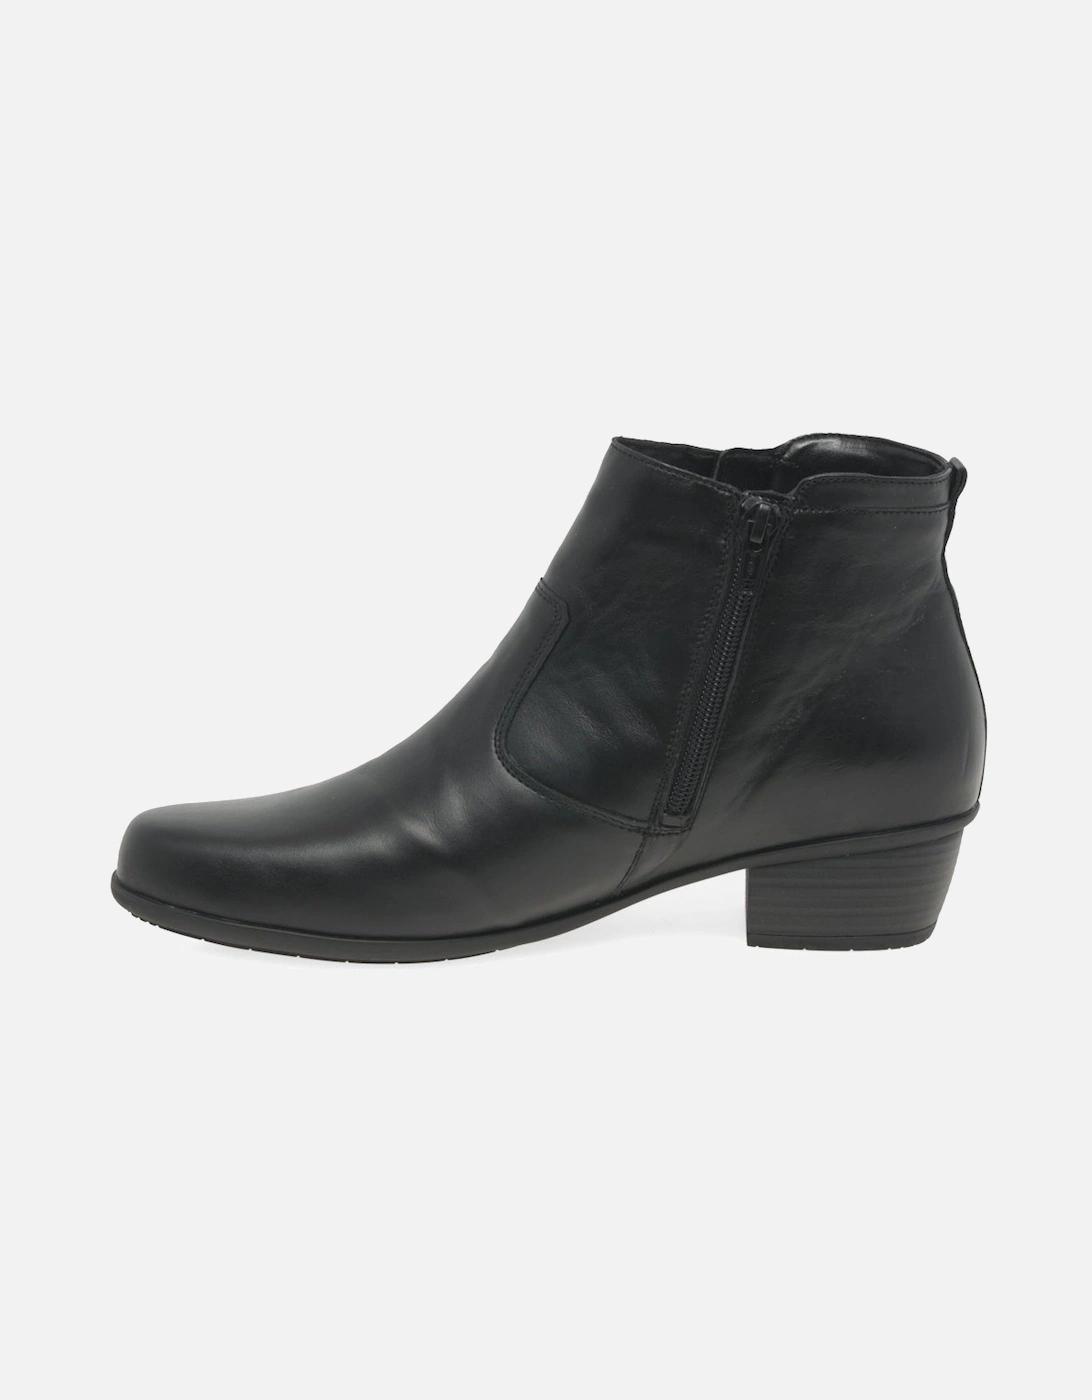 Haifi Womens Ankle Boots